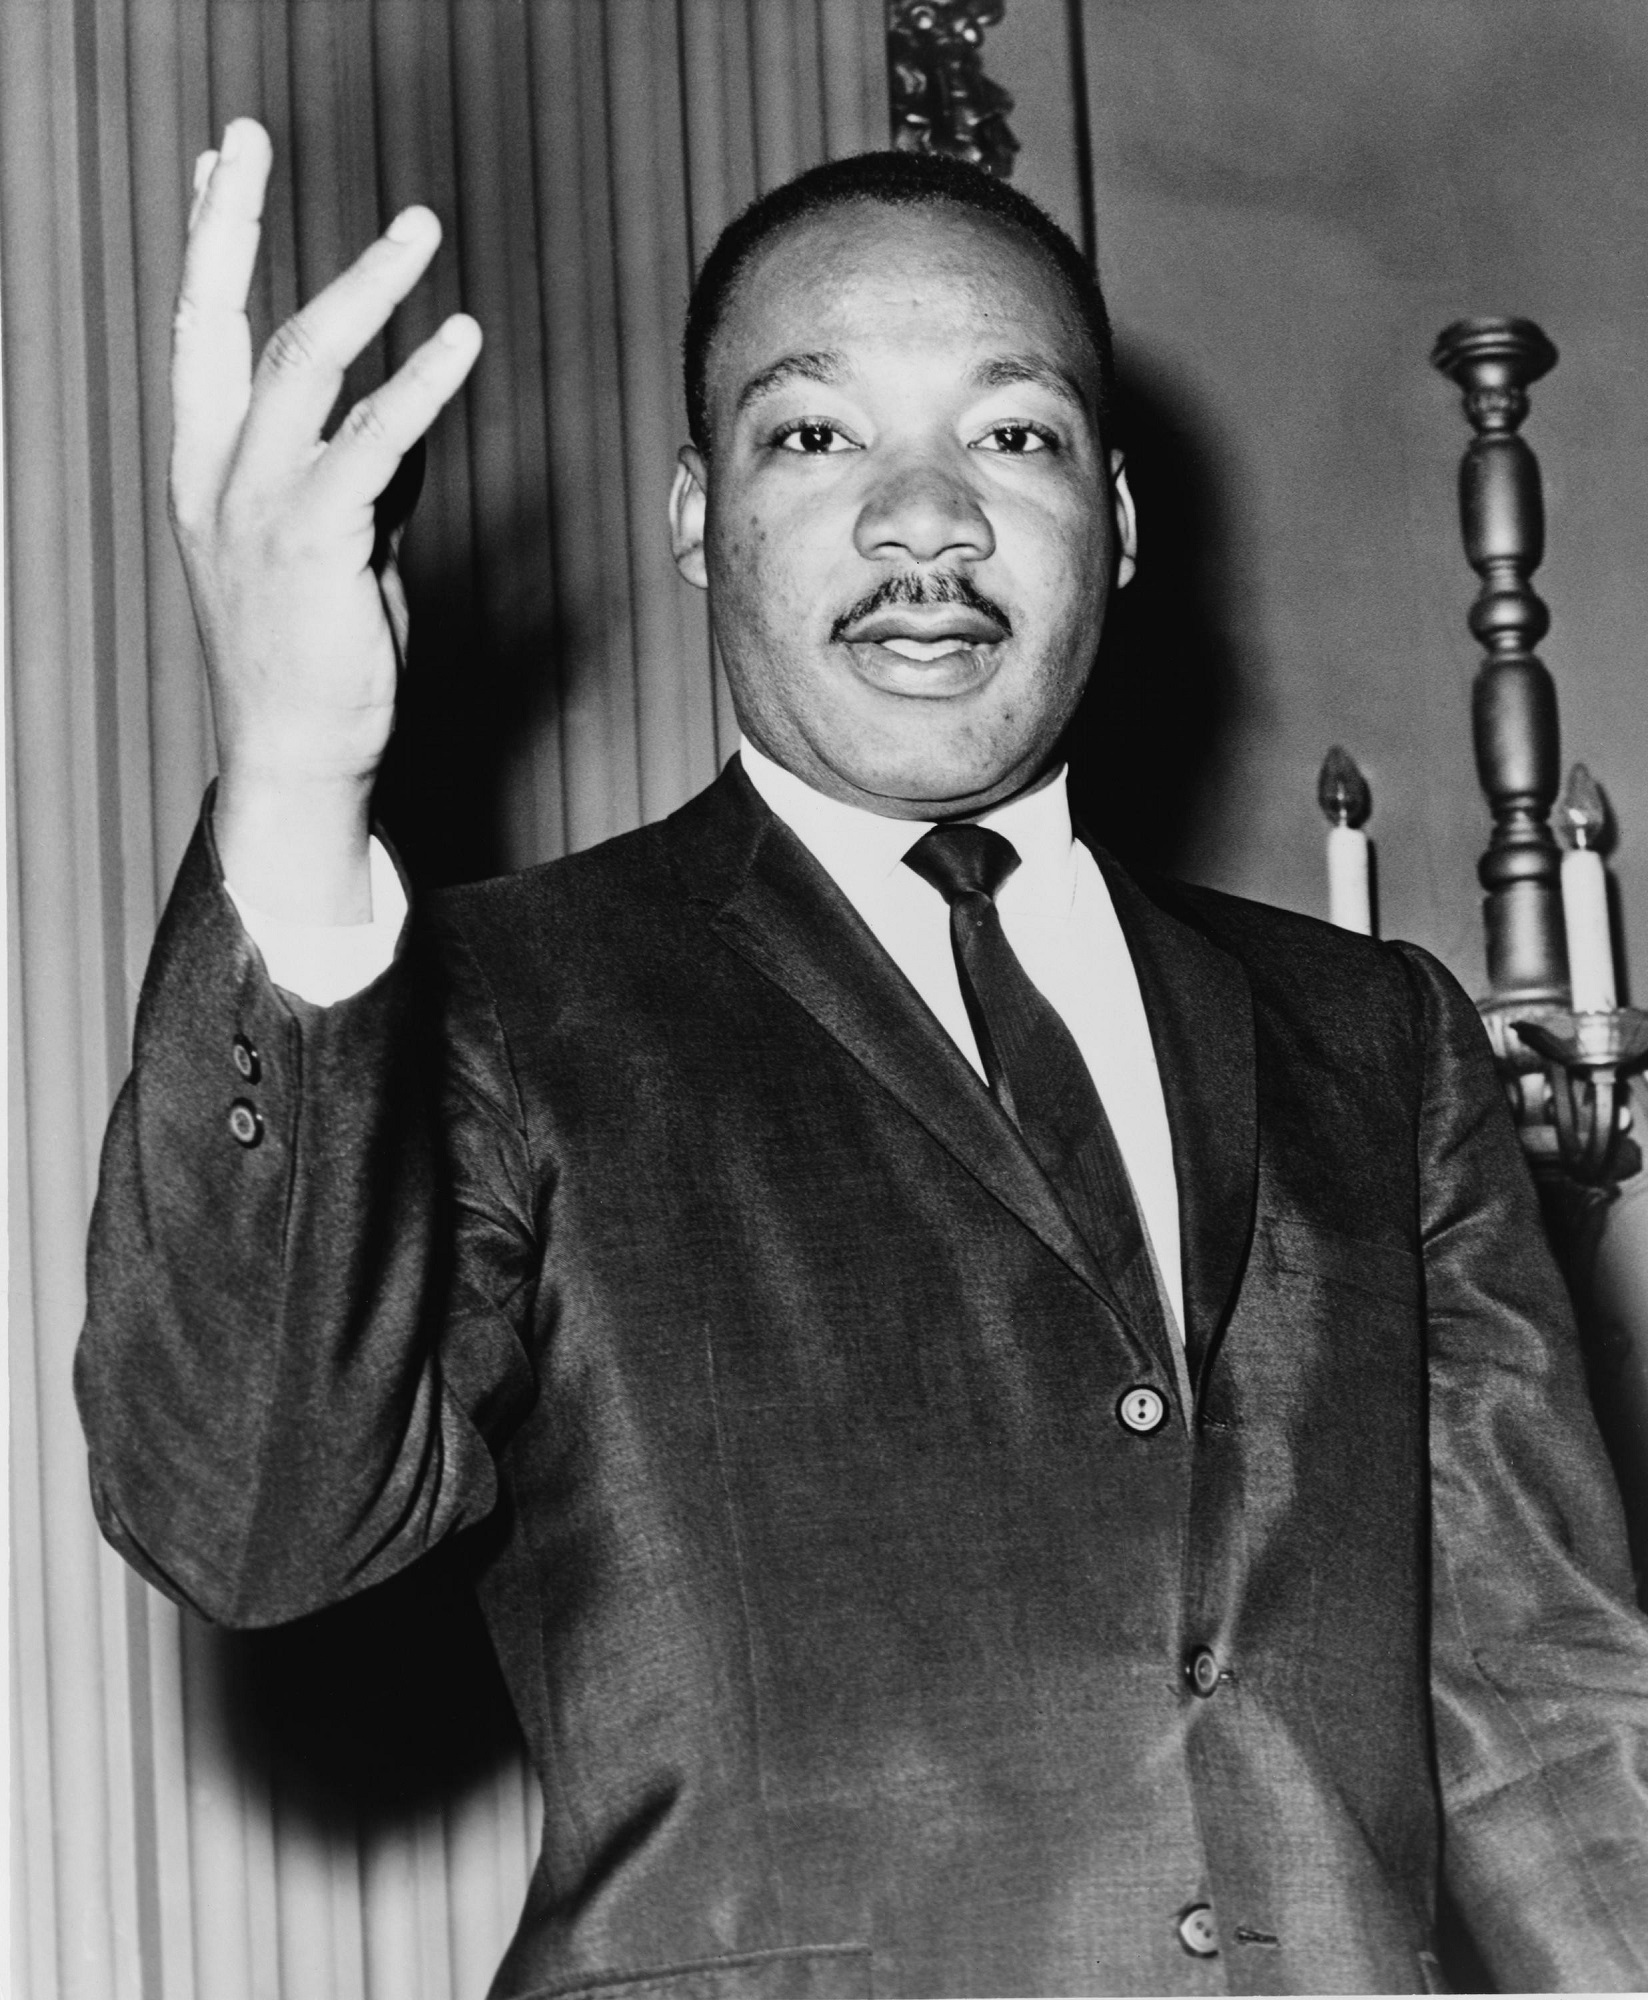 Martin luther king photo